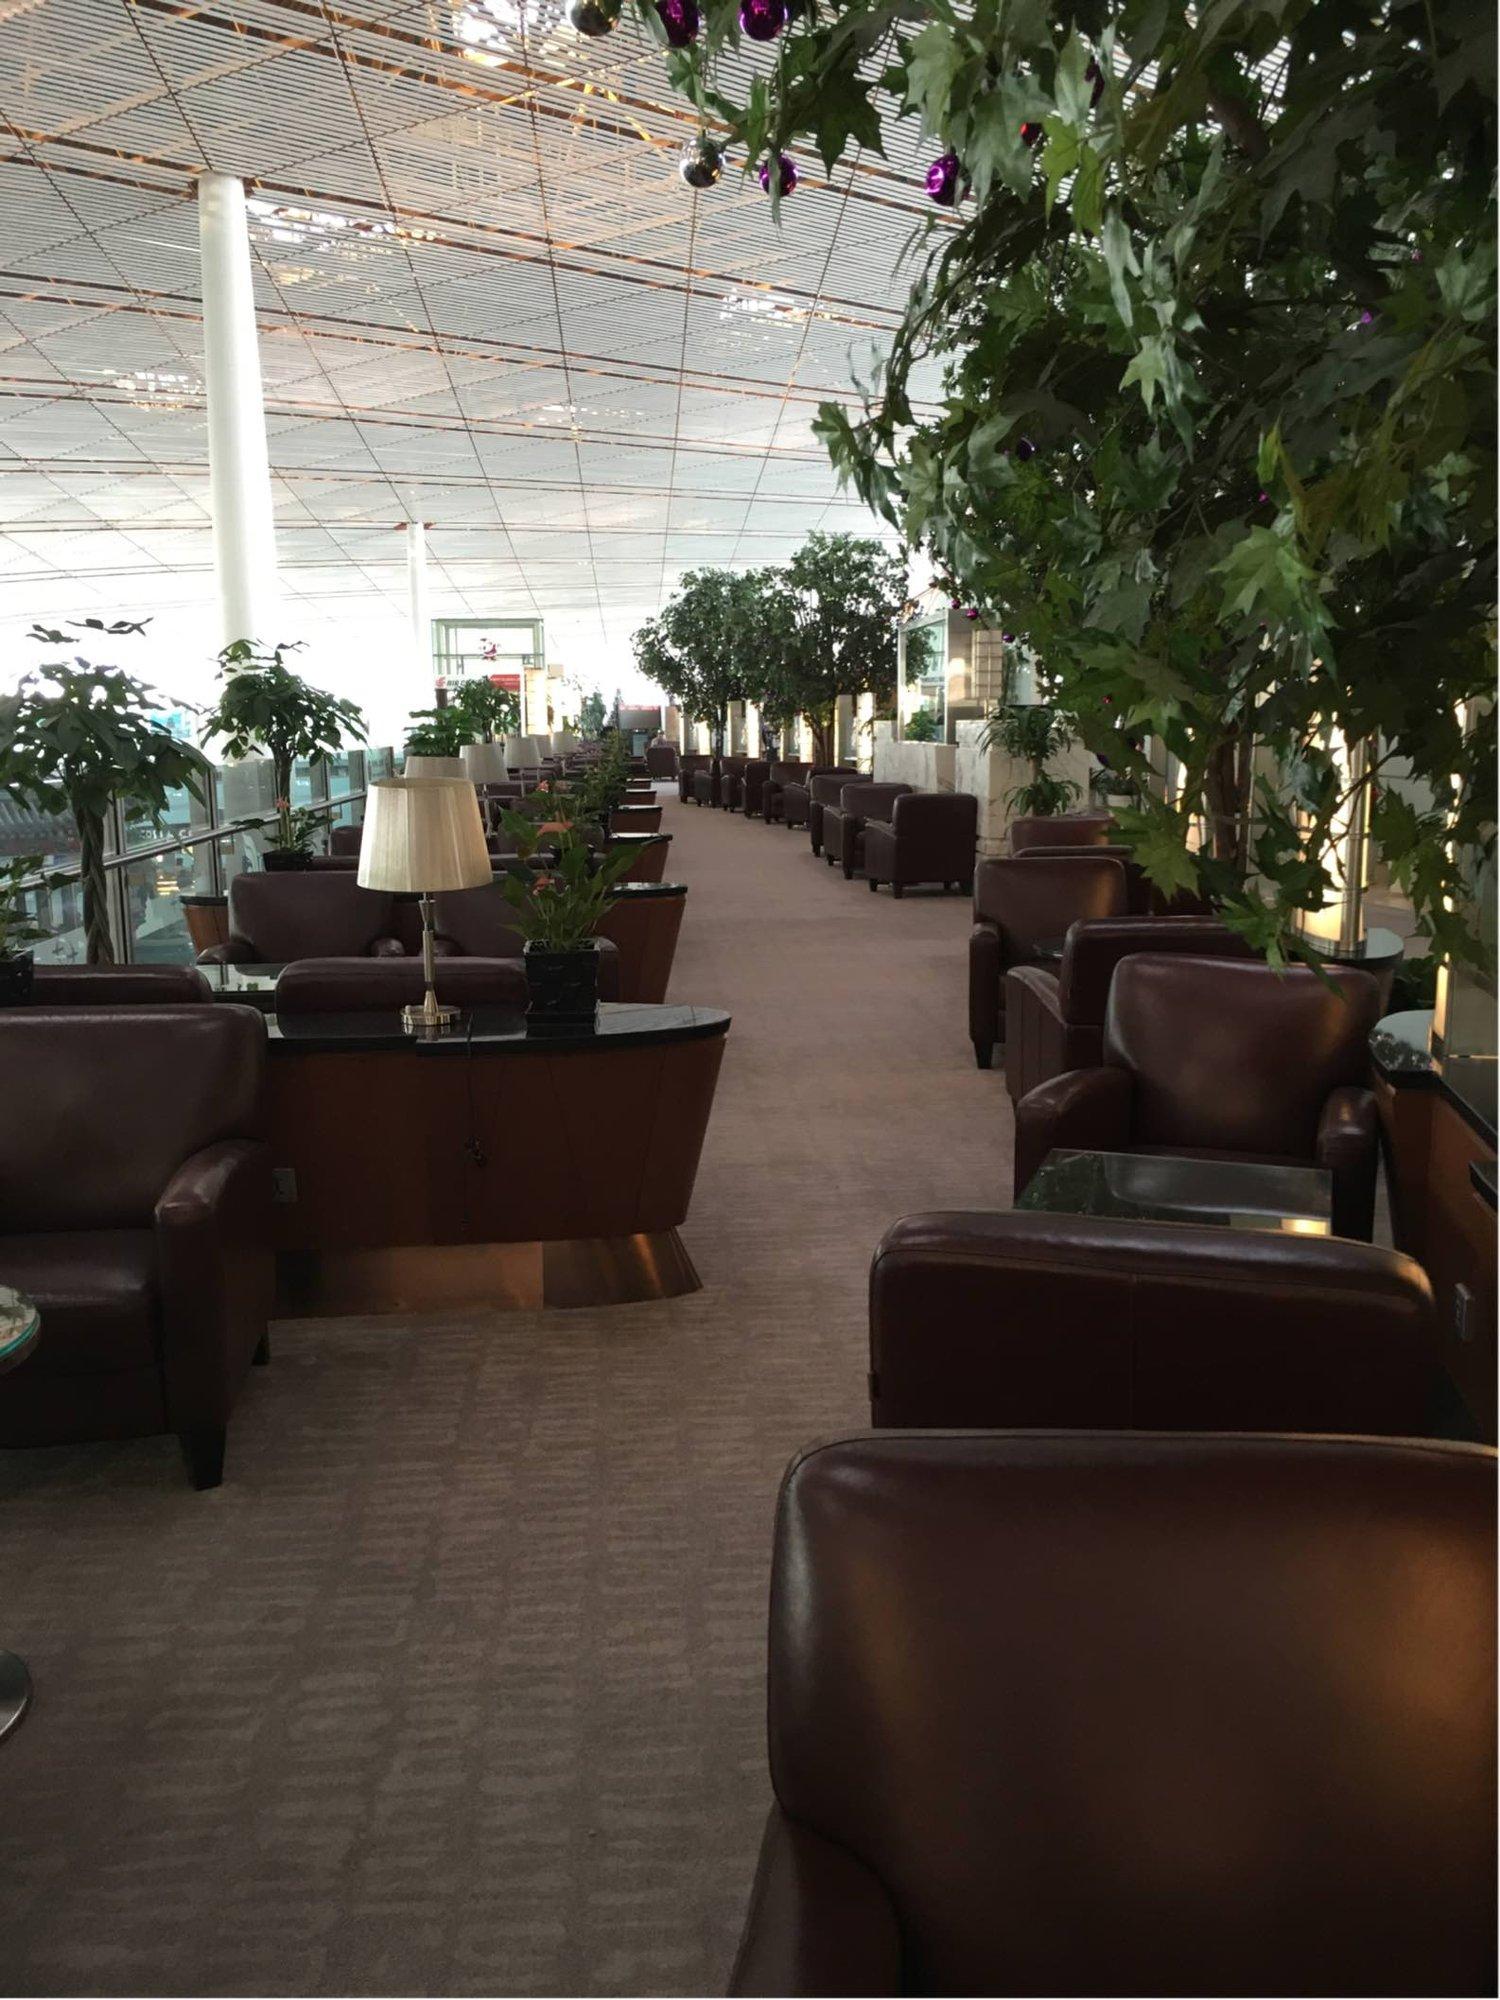 Air China International First Class Lounge image 27 of 38